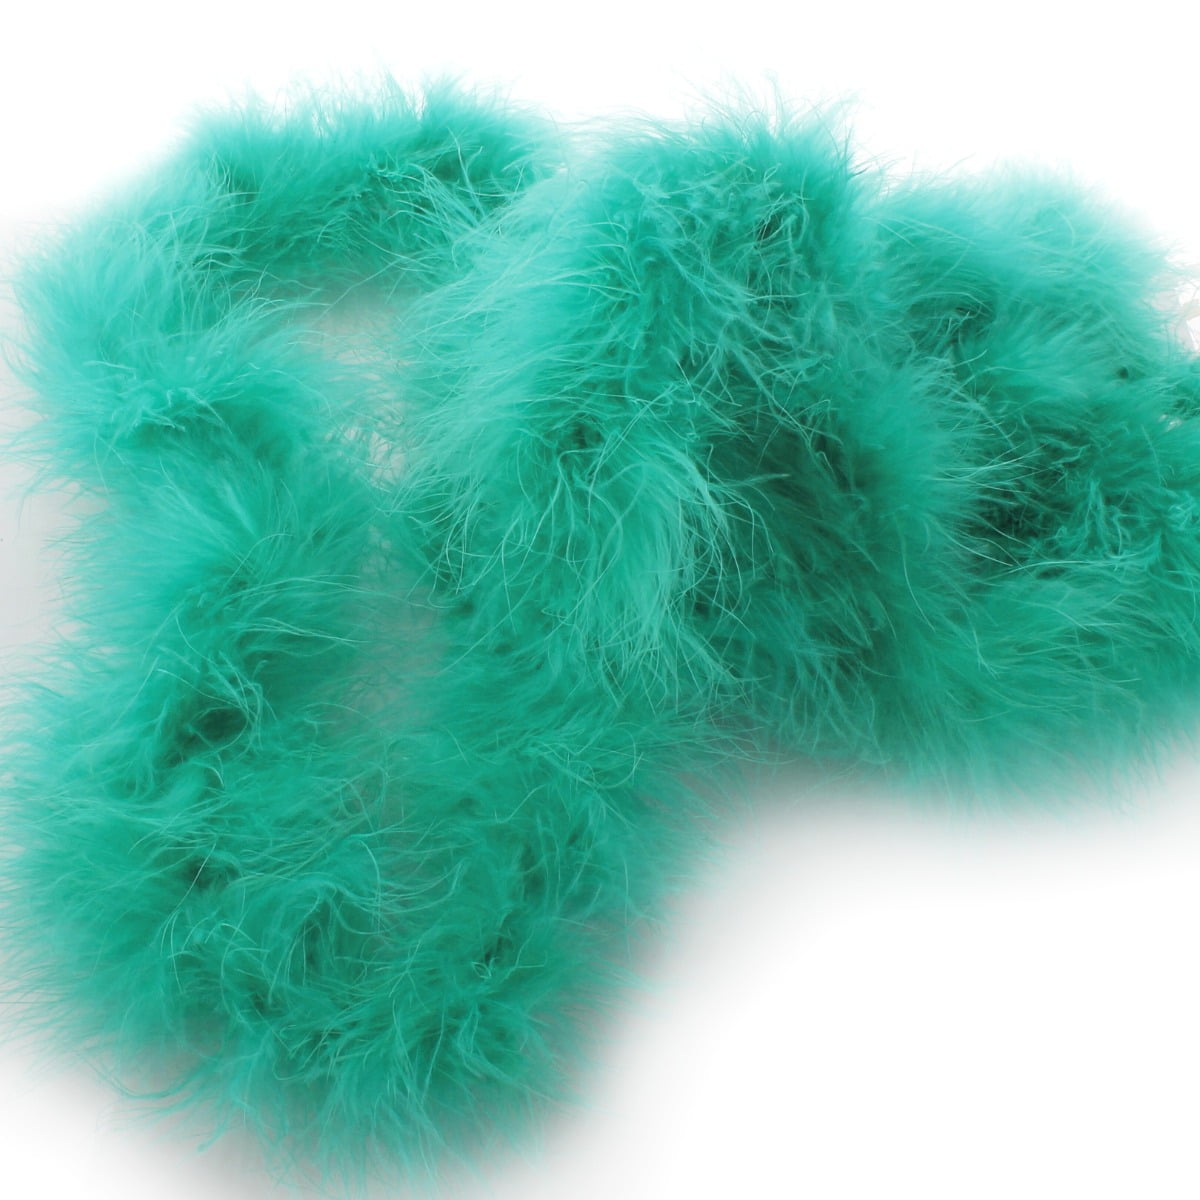 Full and Fluffy Marabou Feather Boa Soft Pastel Rainbow Variety Pack 2 Yard  Lengths - 5pcs 